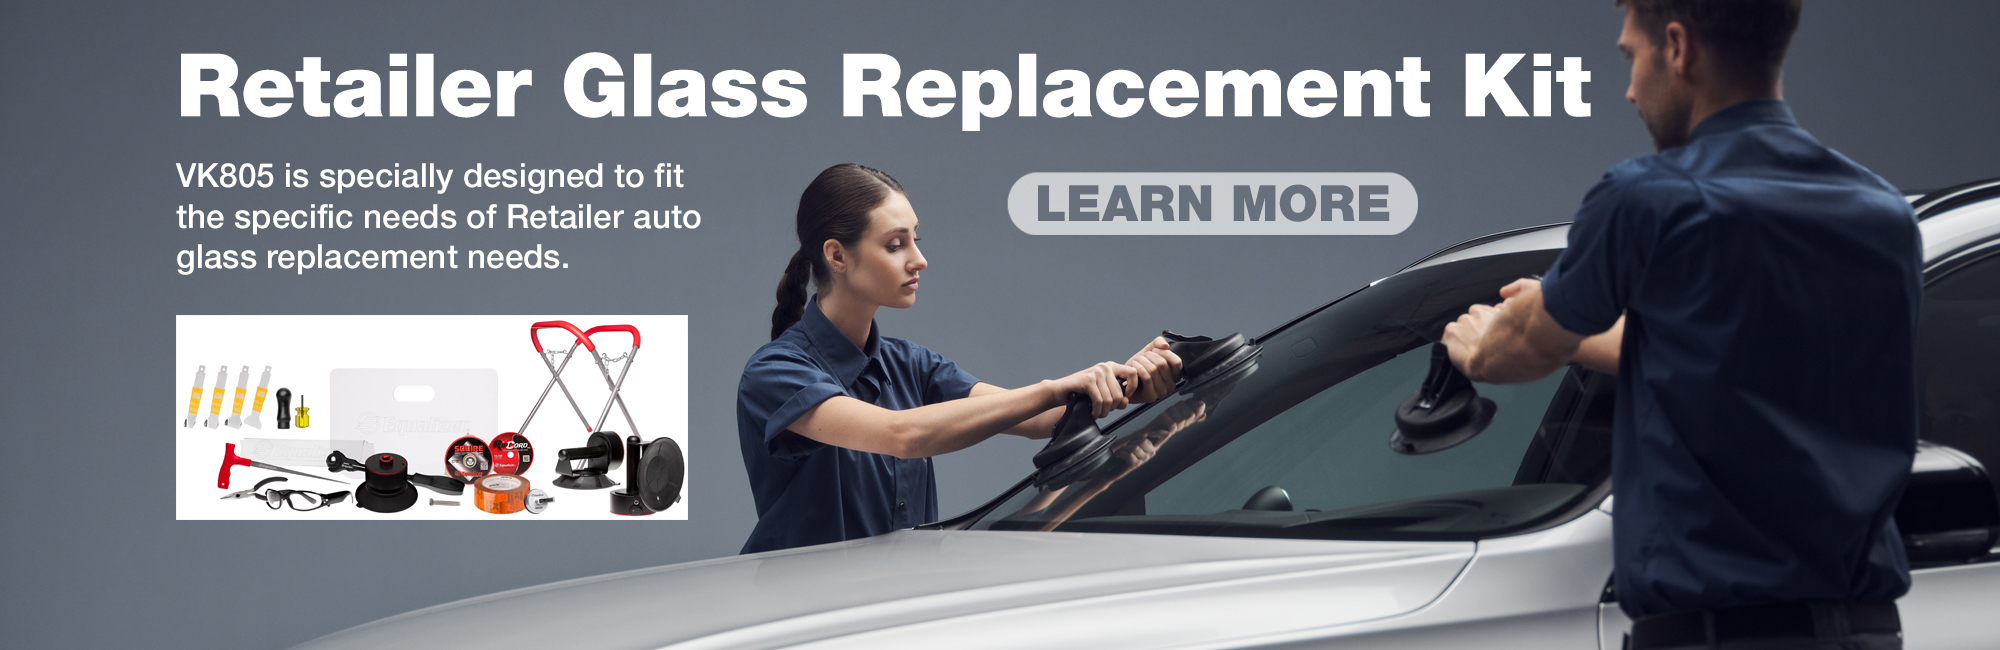 everything you need for glass repair